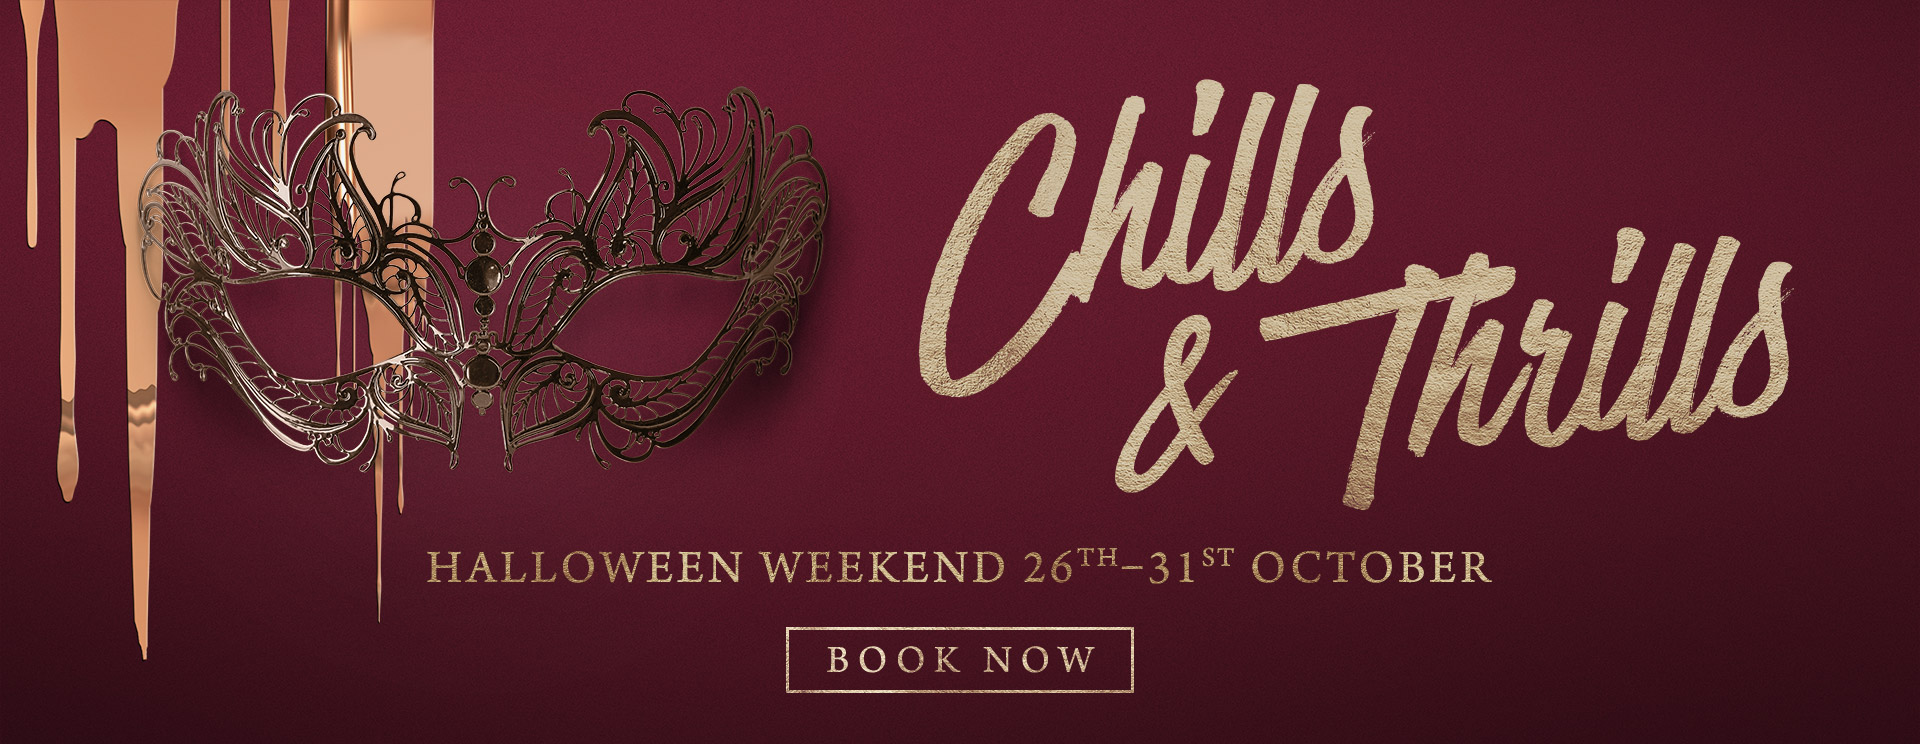 Chills & Thrills this Halloween at The Deer Park